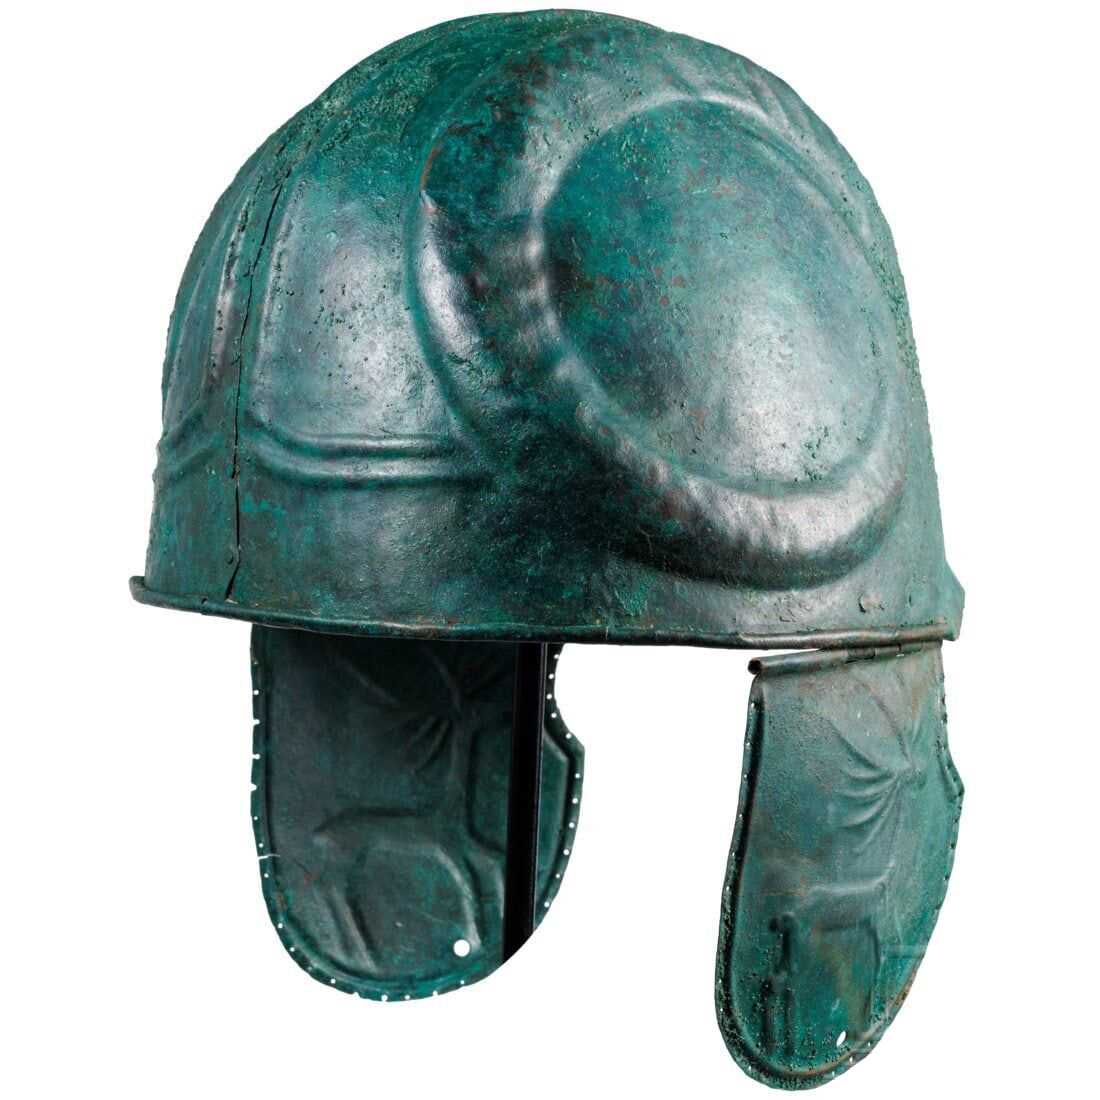 Bronze helmet decorated with an image of ram’s horns, made in the 4th century BC in the northern Black Sea area, estimated at €12,000-€24,000 ($12,840-$25,685) at Hermann Historica on May 14.